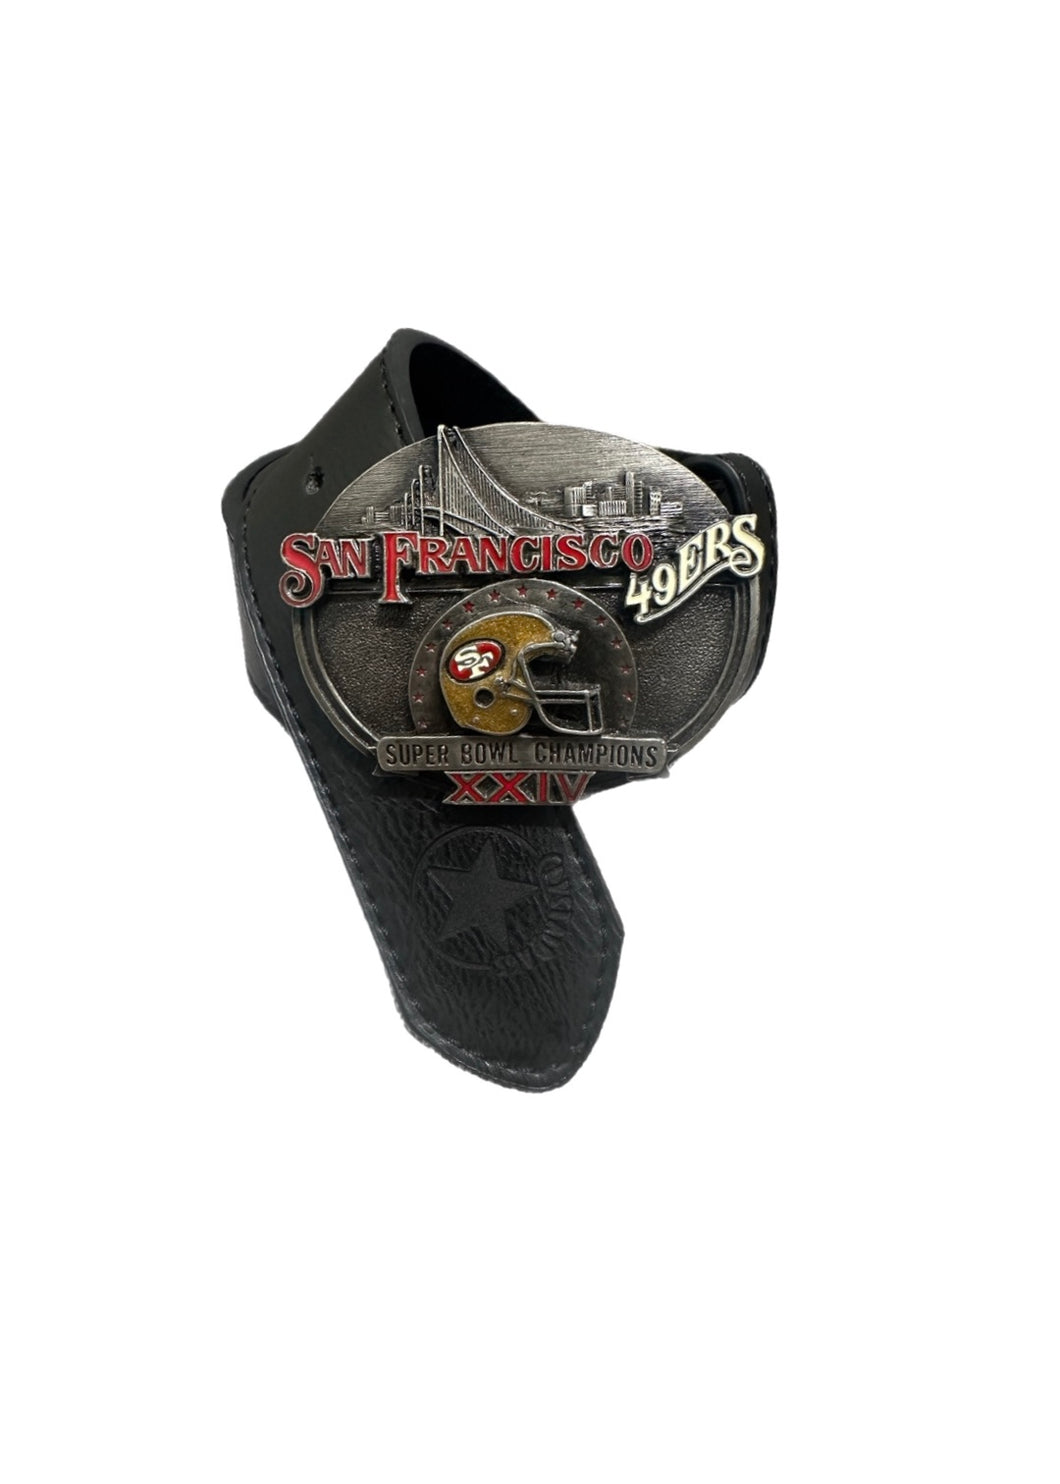 San Francisco 49ers, Football Vintage “Rare Find” SUPER BOWL XXIV CHAMPIONS Belt Buckle with New Soft Leather Strap